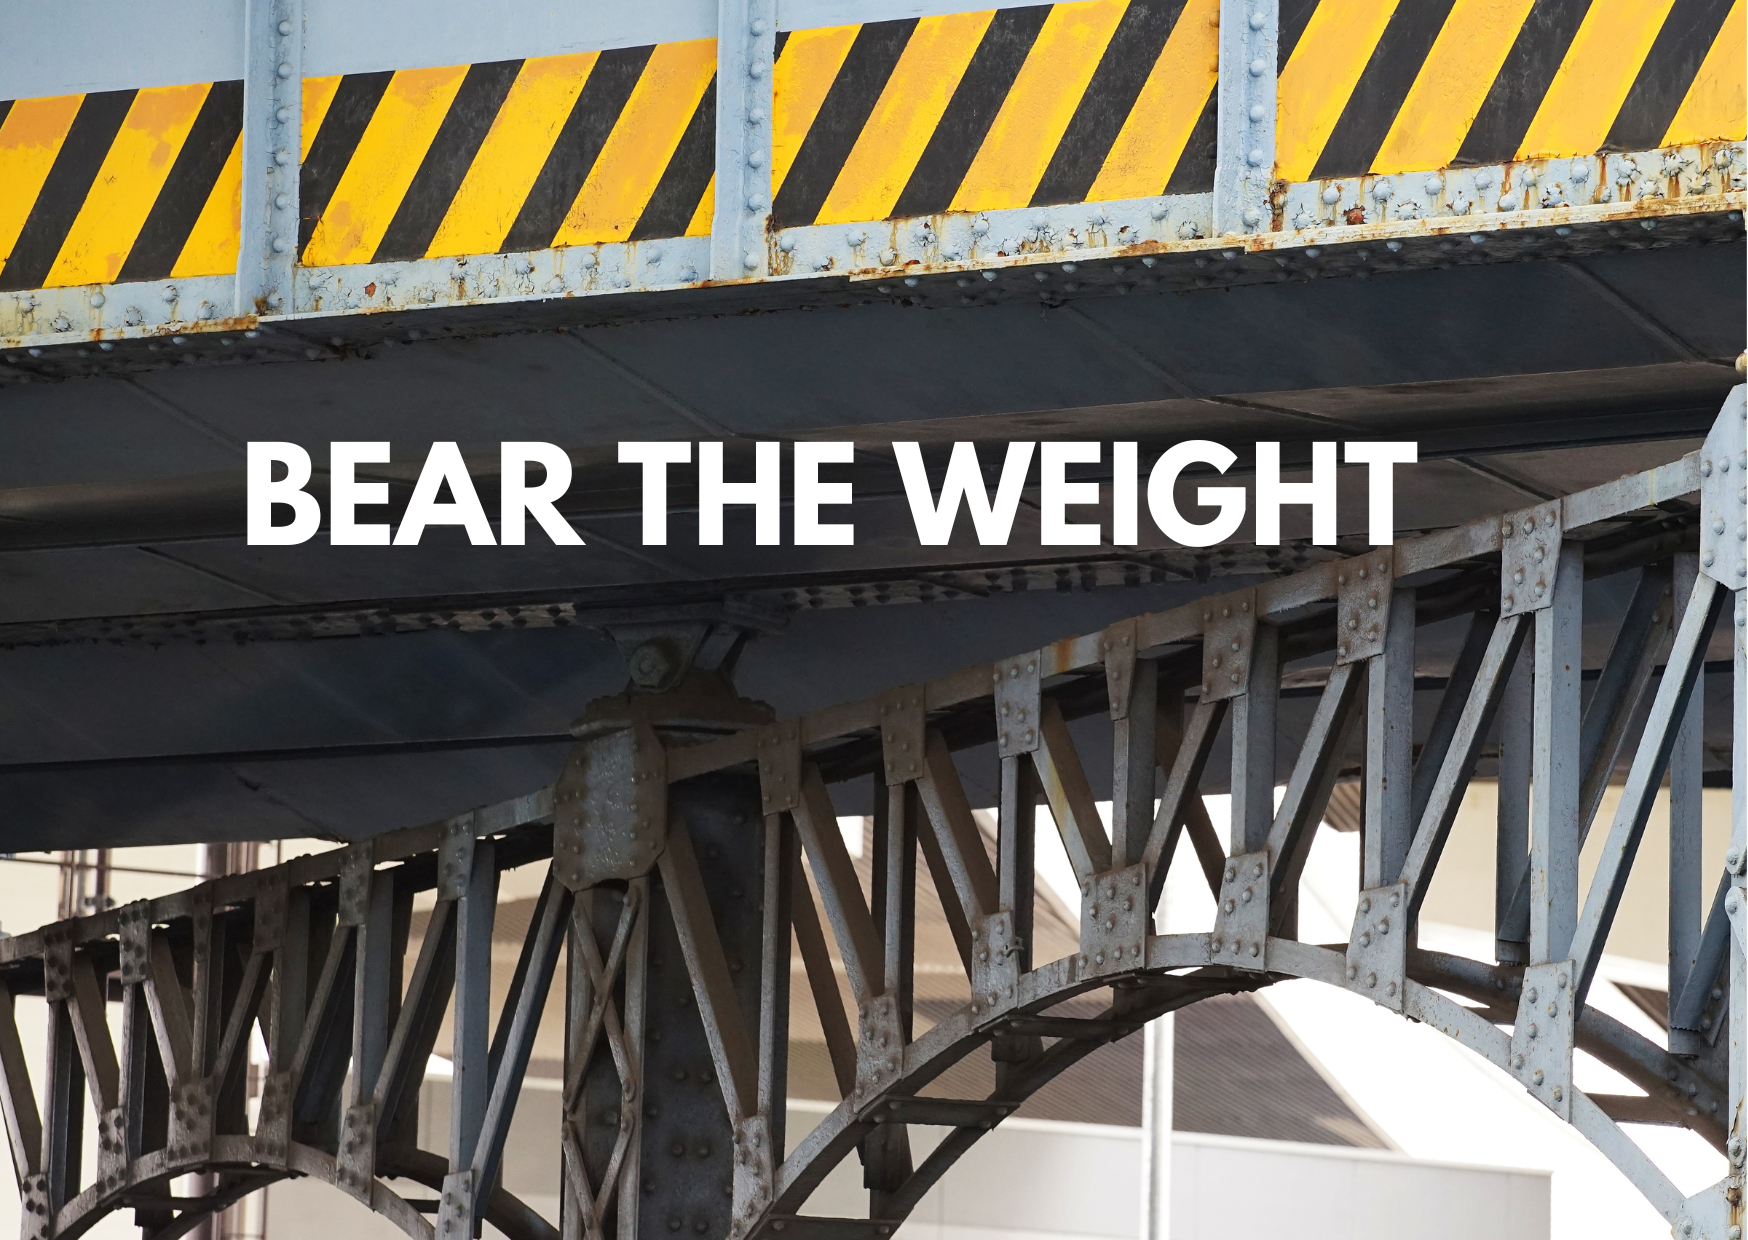 A picture showing support beams of a metal bridge with the caption 